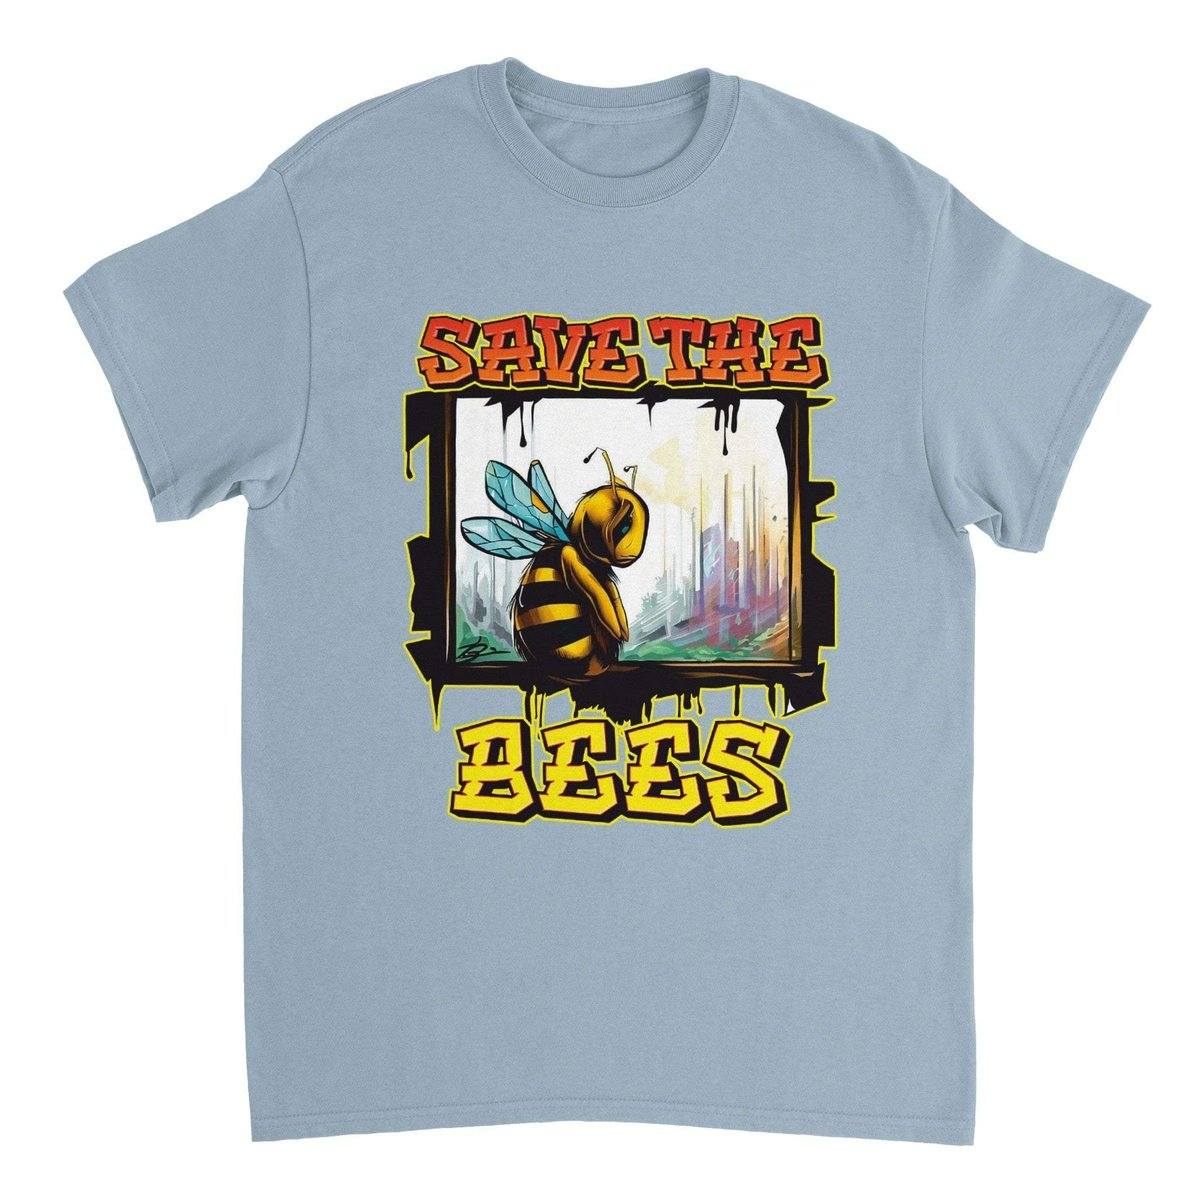 Save The Bees Tshirt - Crying Bee Window - Unisex Crewneck T-shirt Australia Online Color Light Blue / S